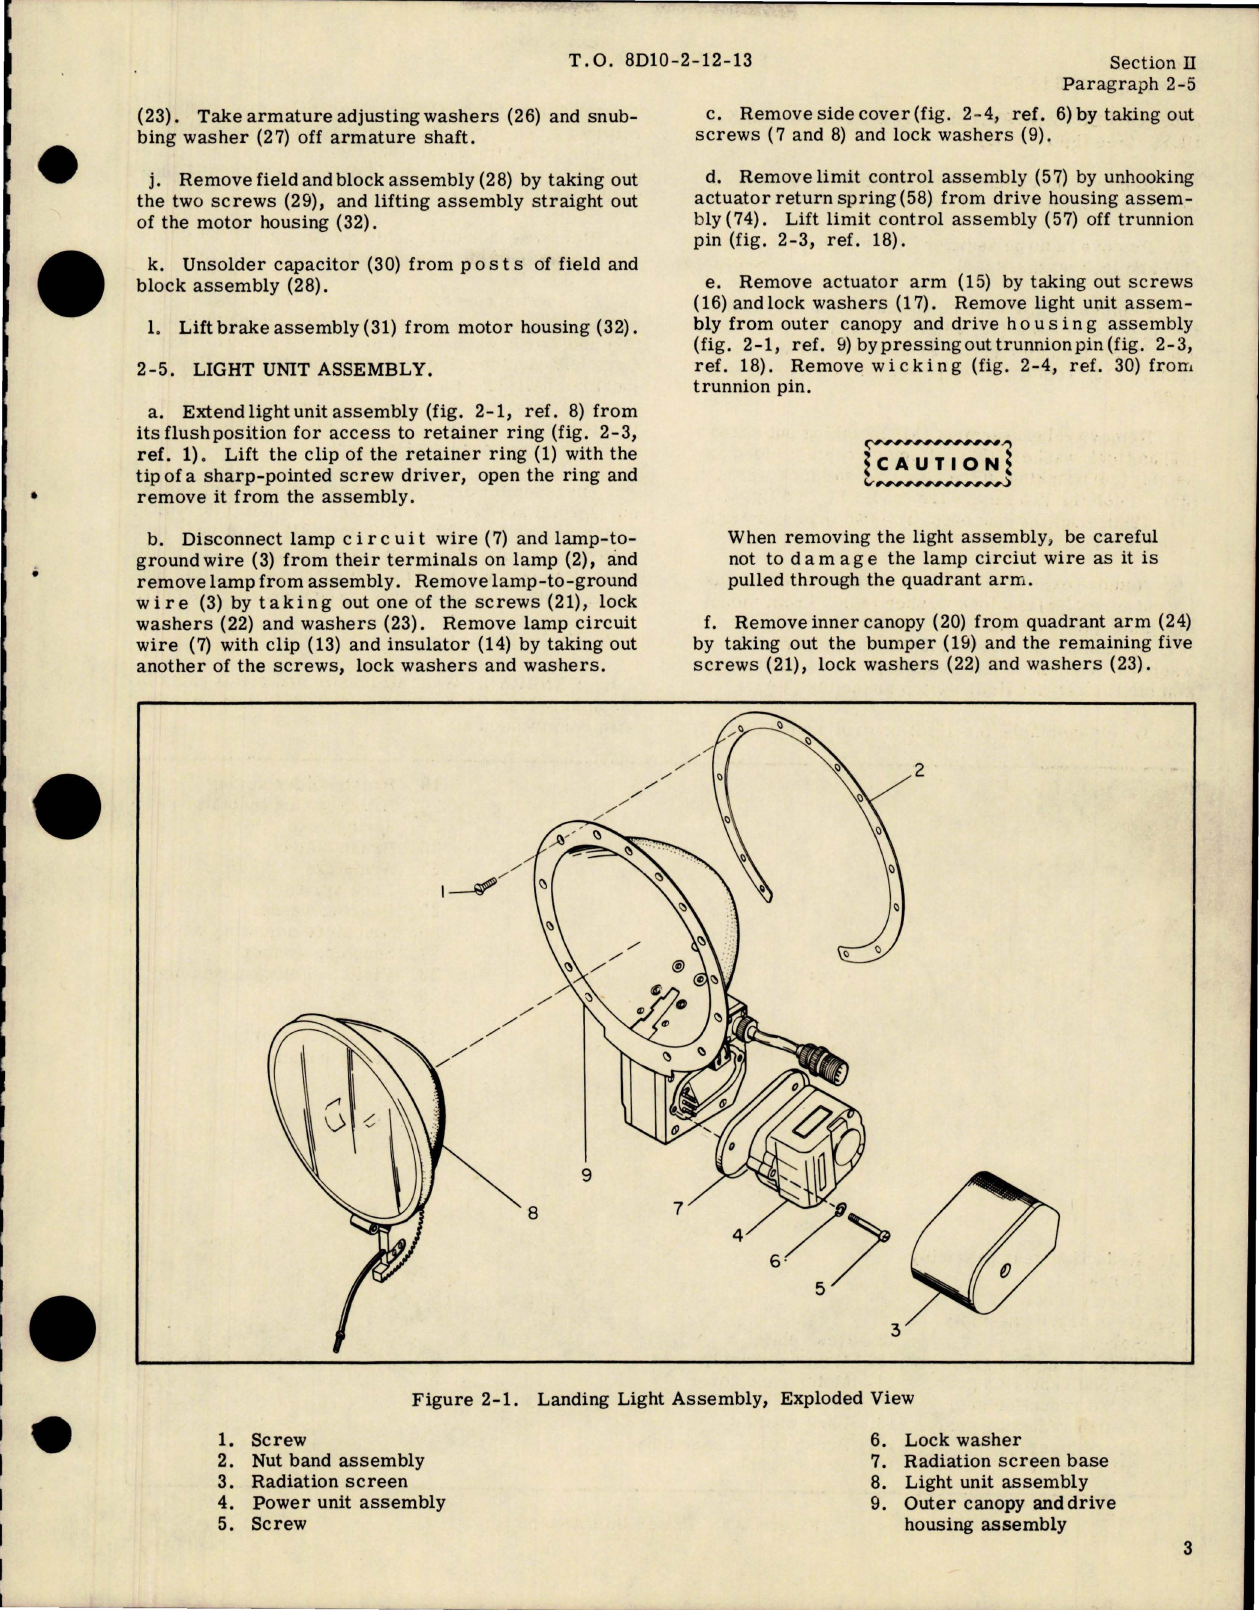 Sample page 7 from AirCorps Library document: Overhaul Instructions for Electrically Retractable Landing Light Assemblies